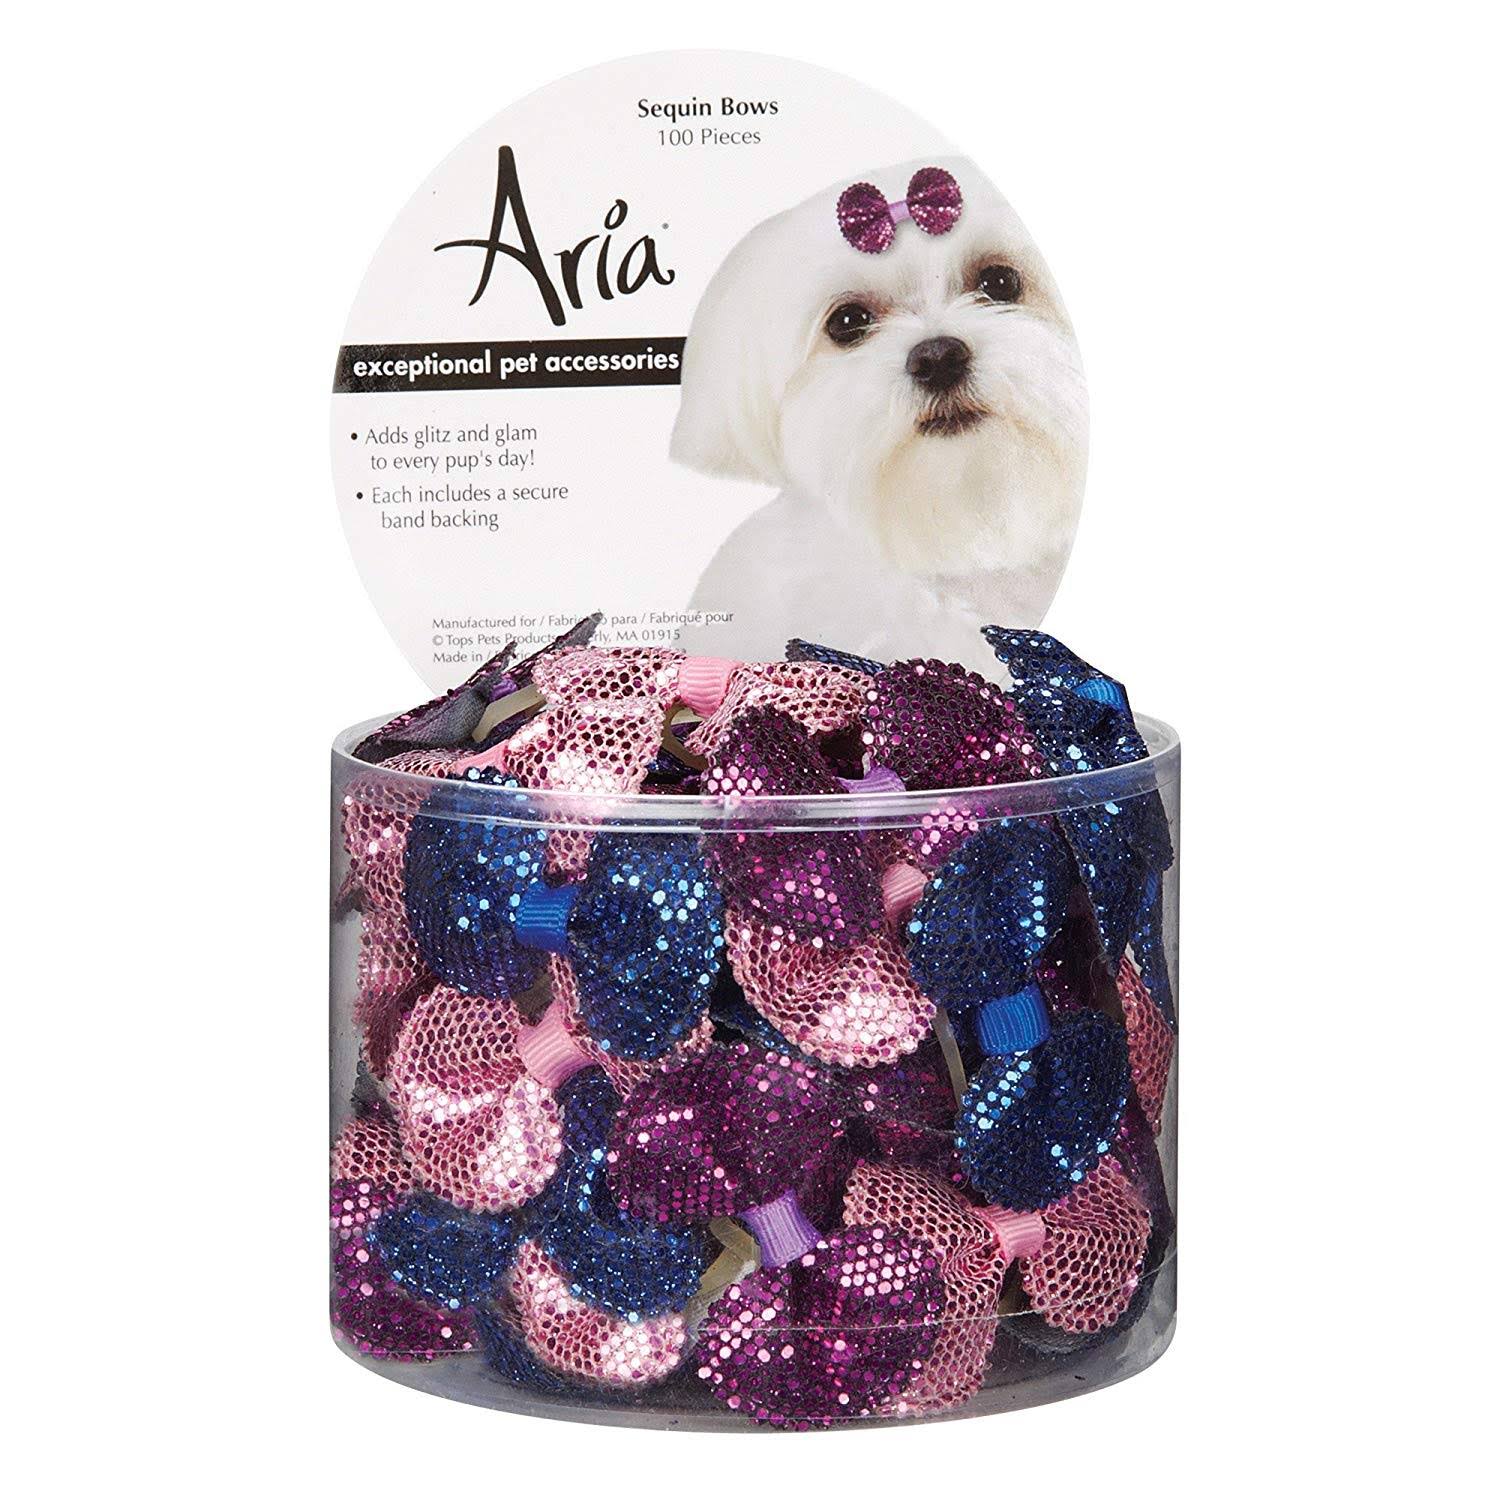 Aria Sequin Dog Bows Canister - 100pc